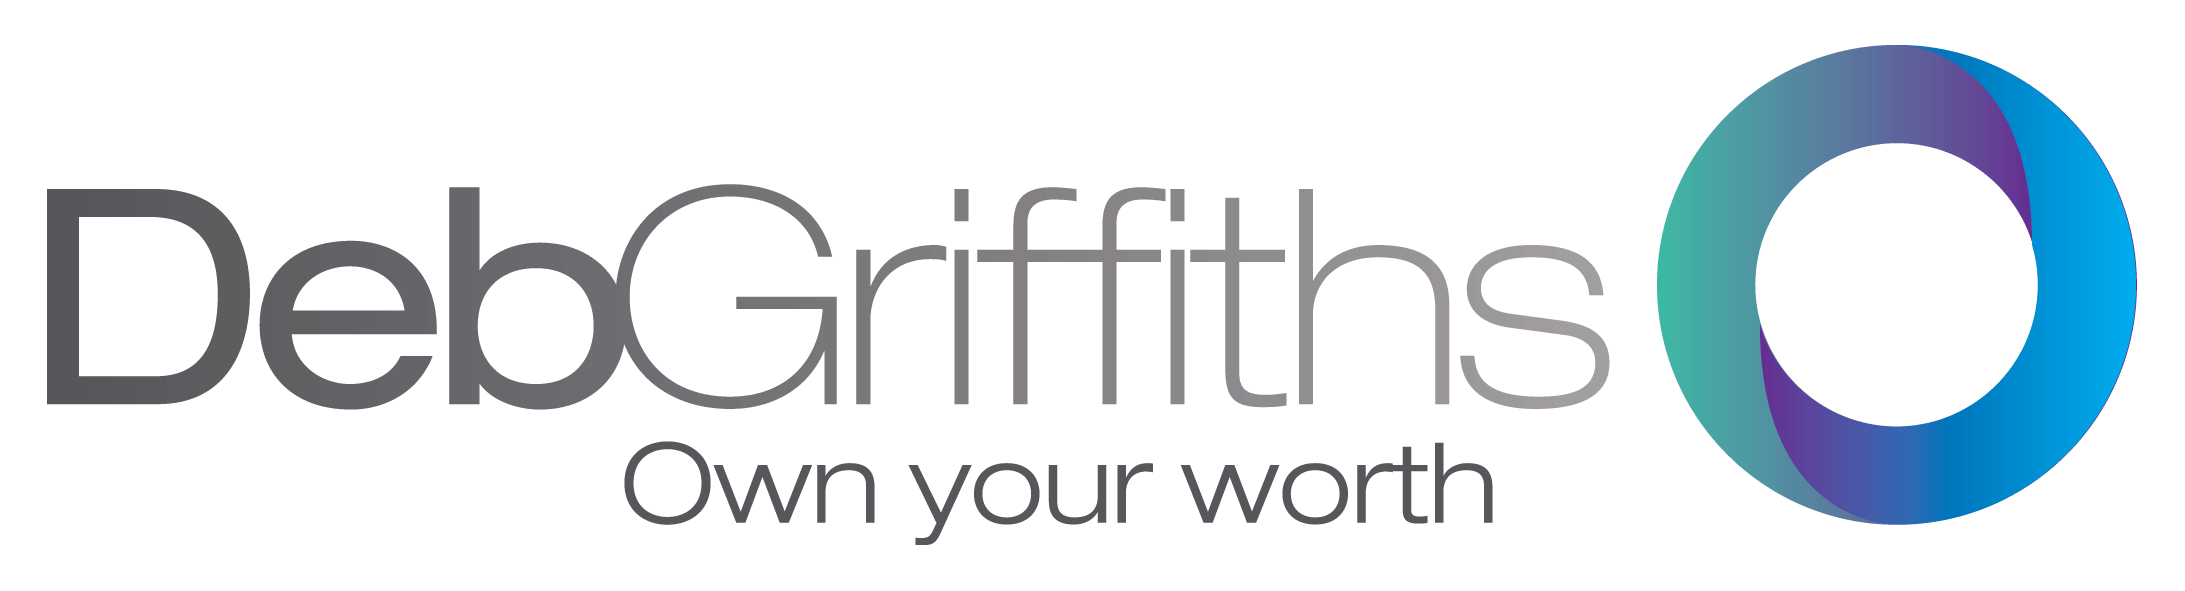 Deb Logo - Deb Griffiths. Own Your Worth